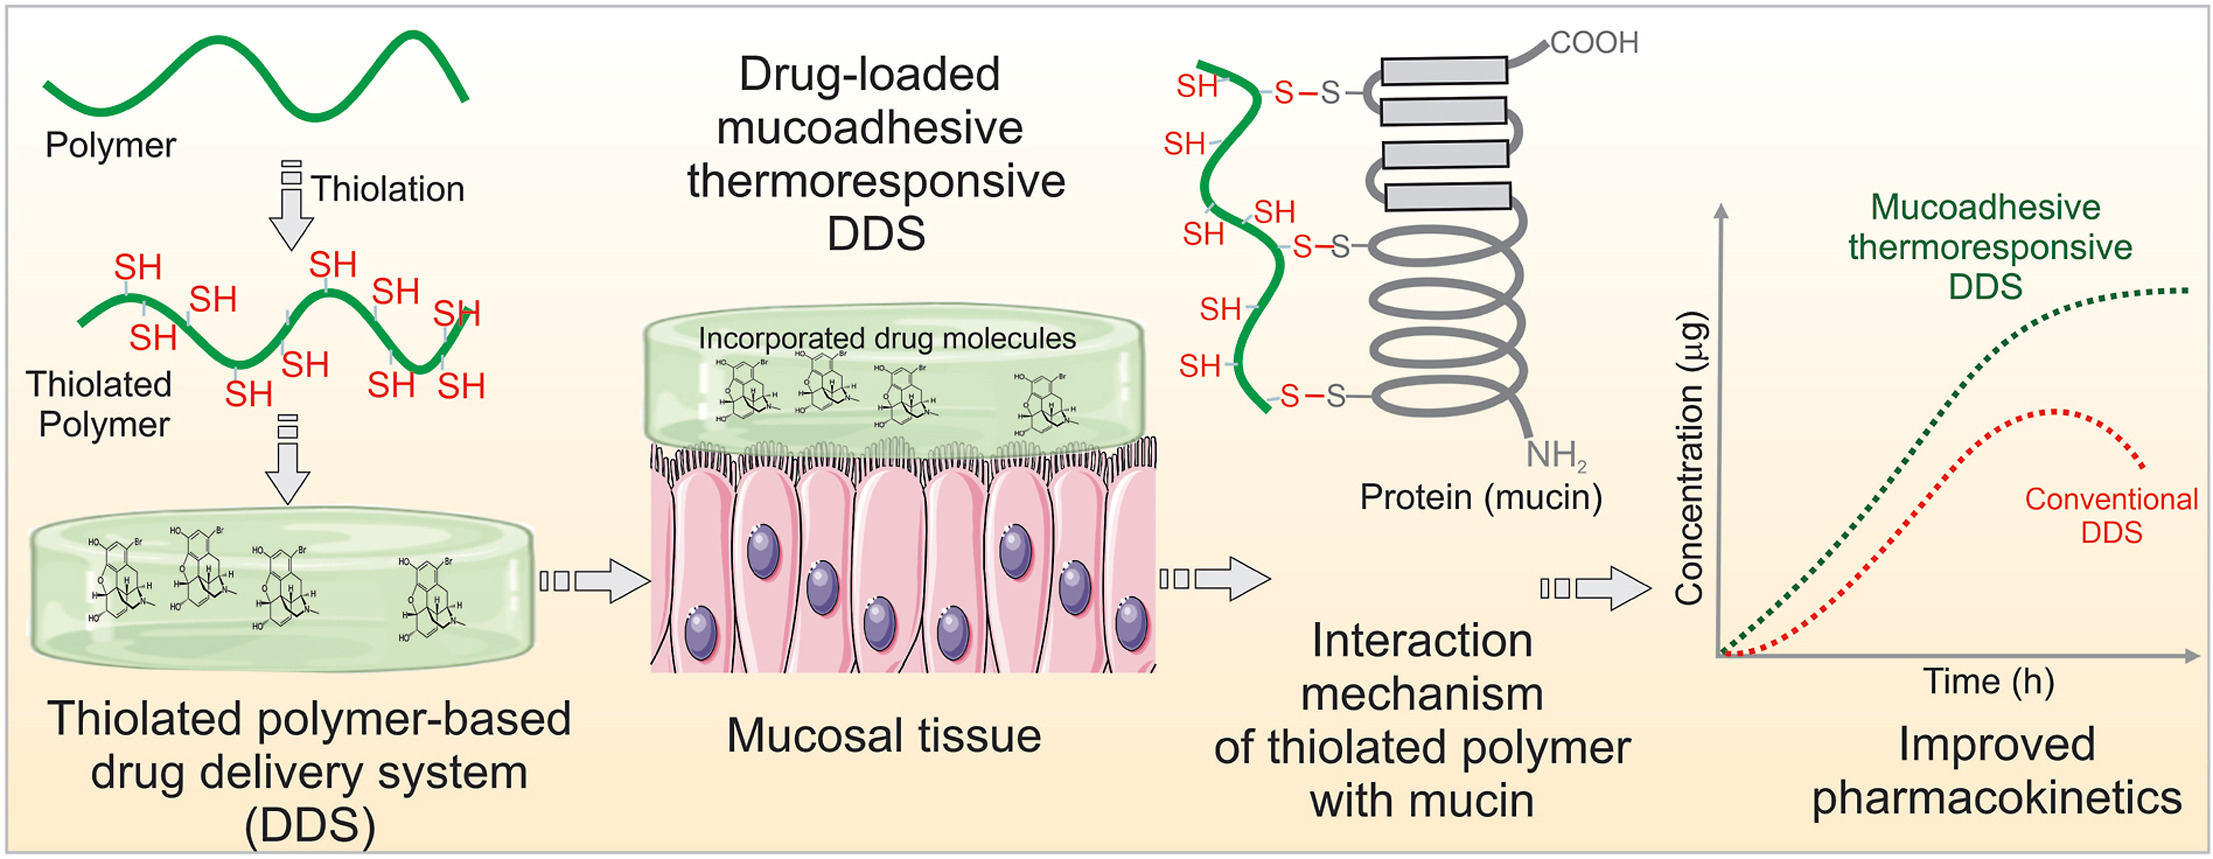 Thiolated polymers: An overview of mucoadhesive properties and their potential in drug delivery via mucosal tissues